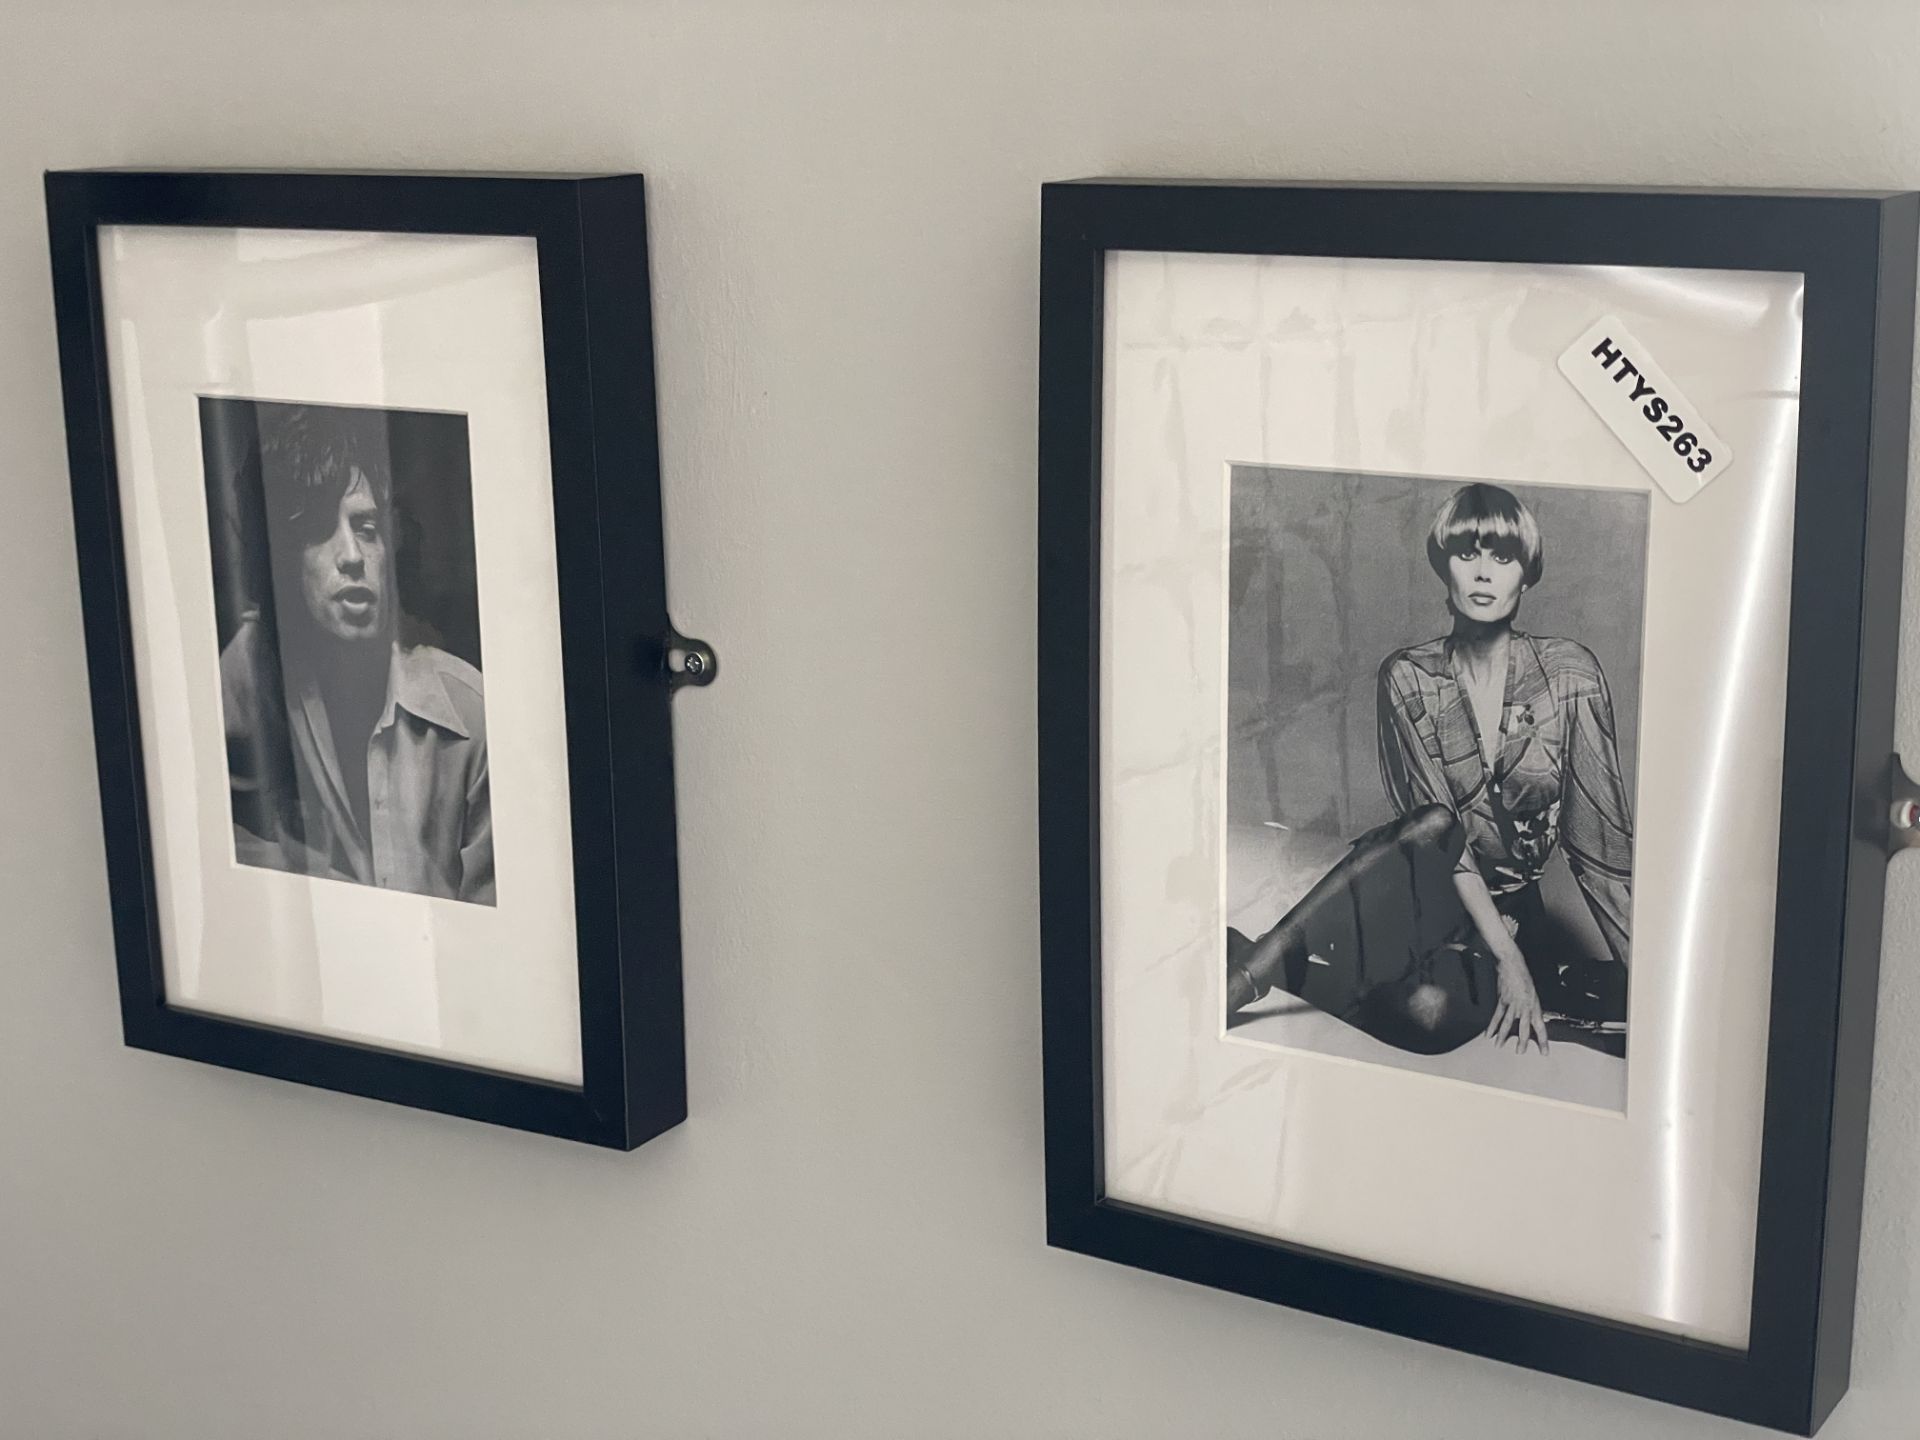 4 x Wall Pictures Featuring Well Known 1960's Actors - Black and White Images With Black Frames - - Image 3 of 4